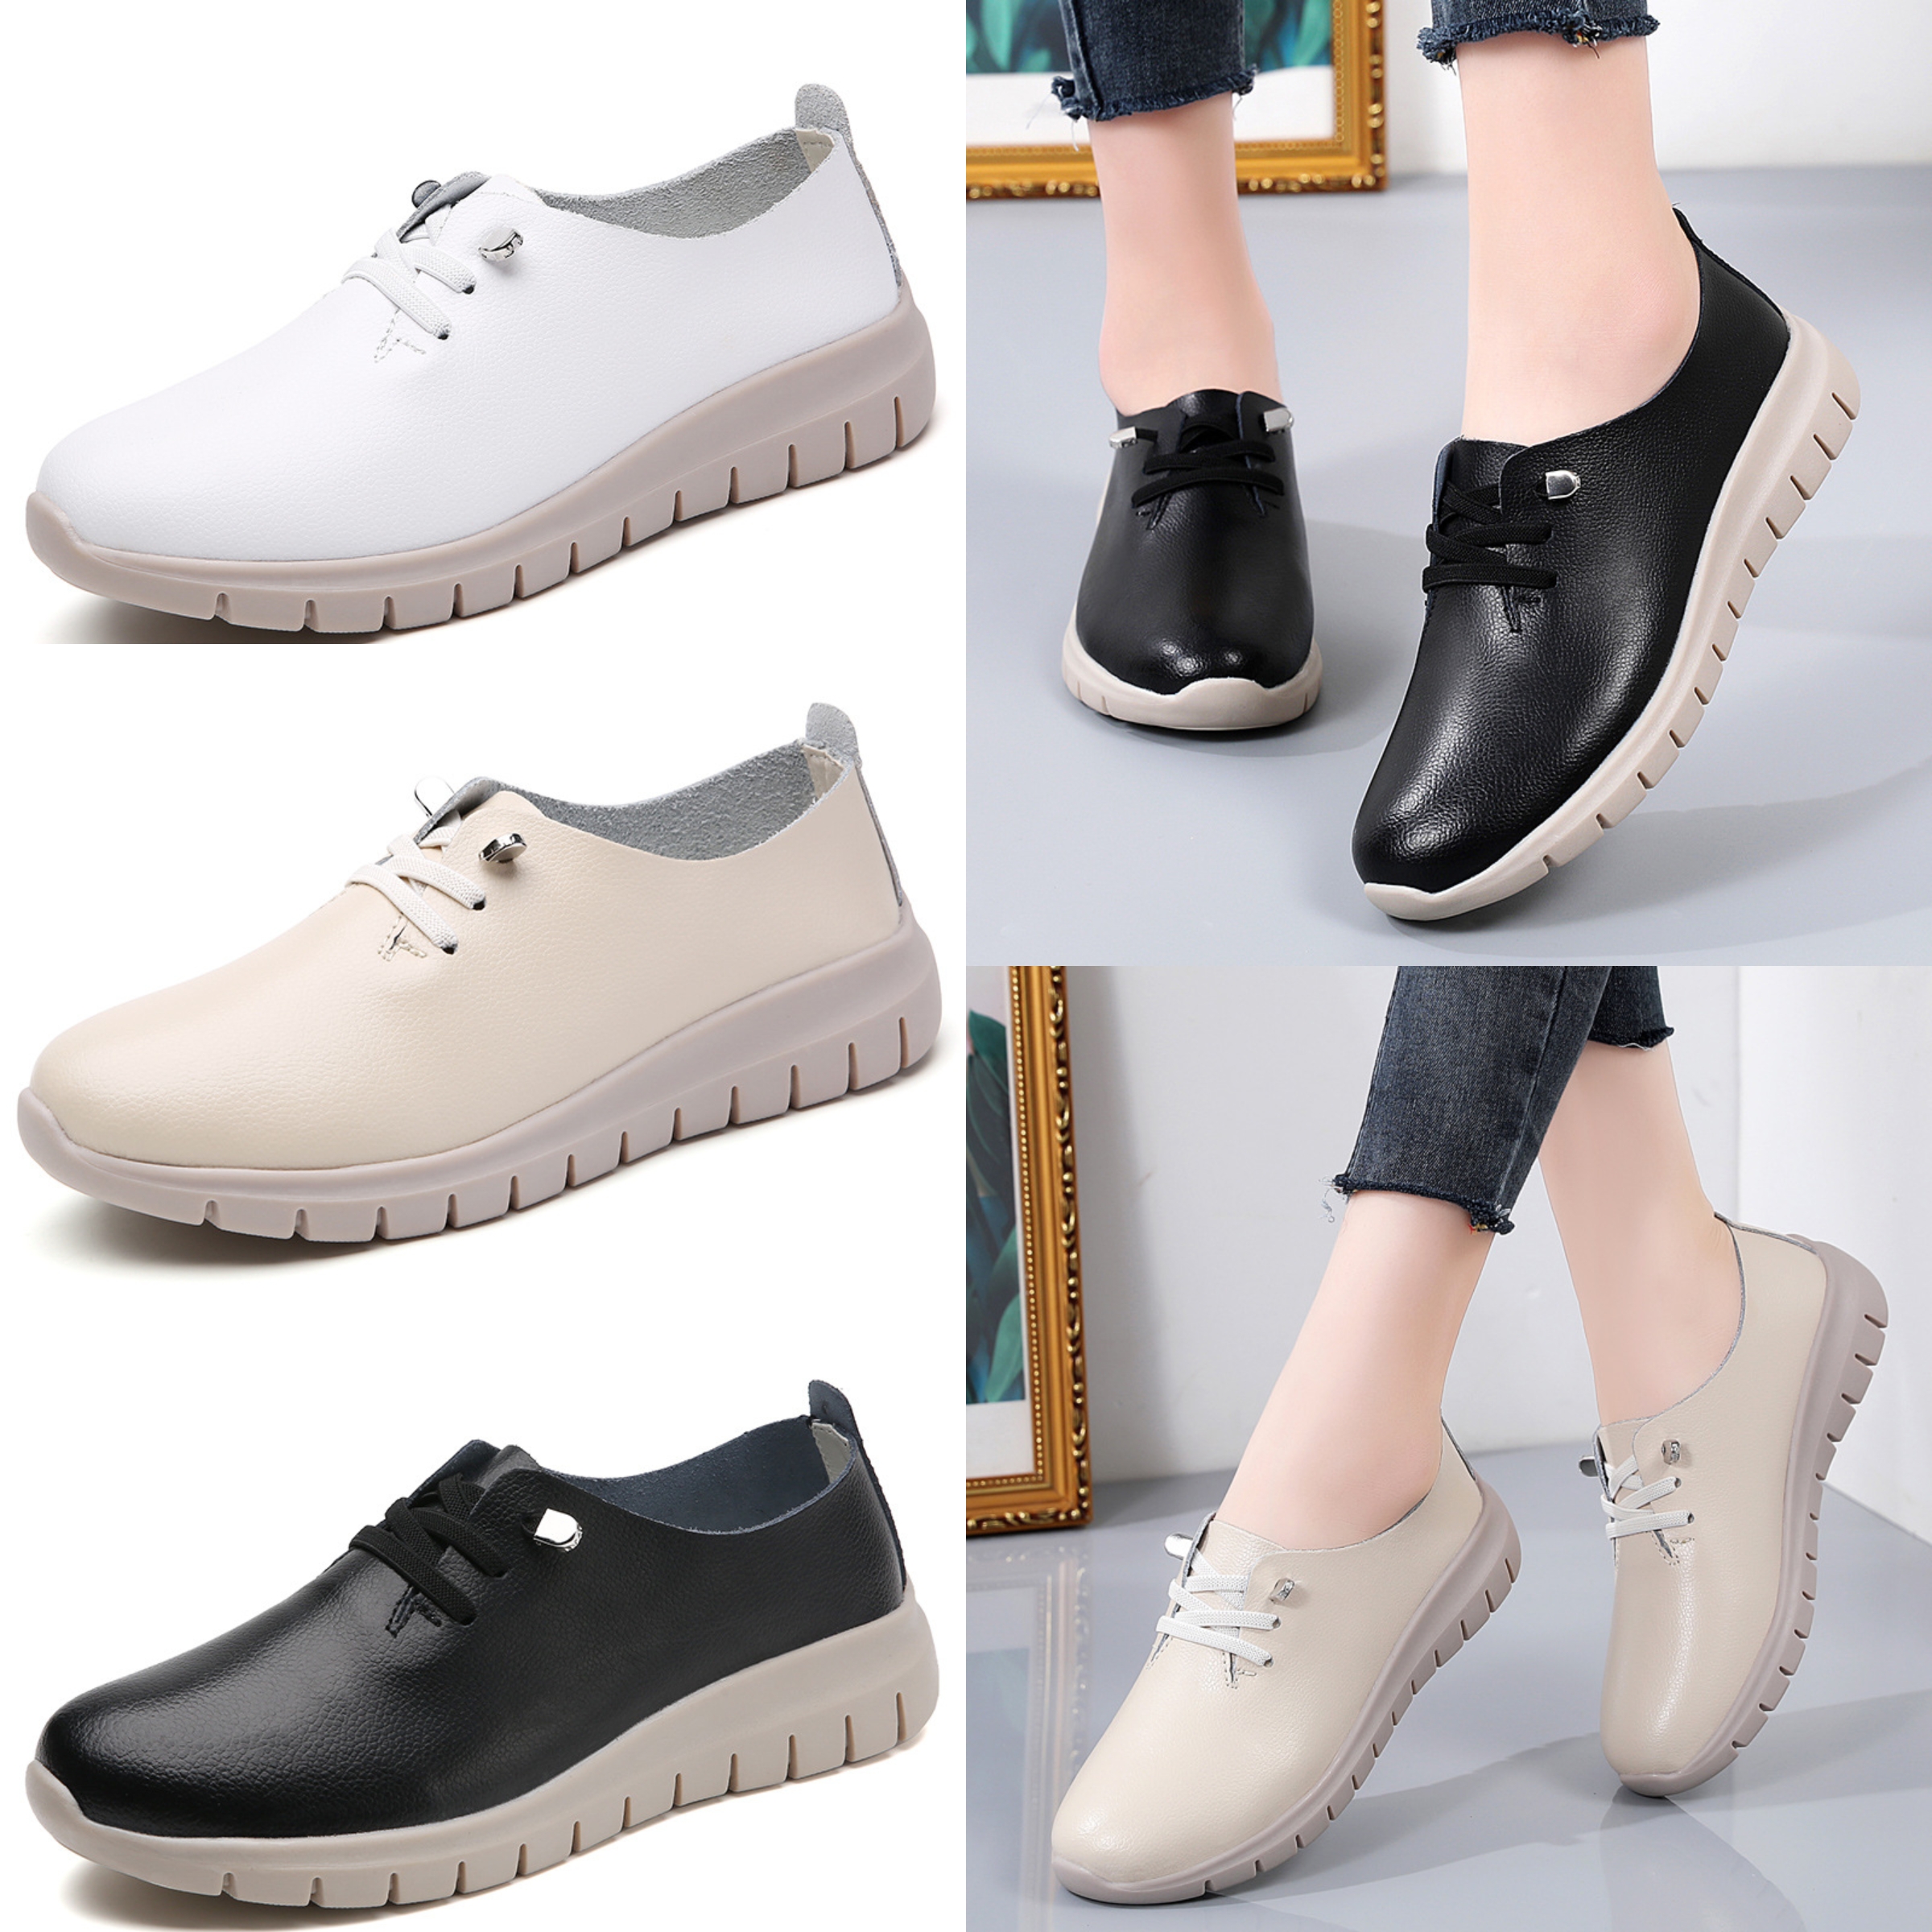 Boloone Genuine Leather Soft-soled Versatile Breathable Shoes